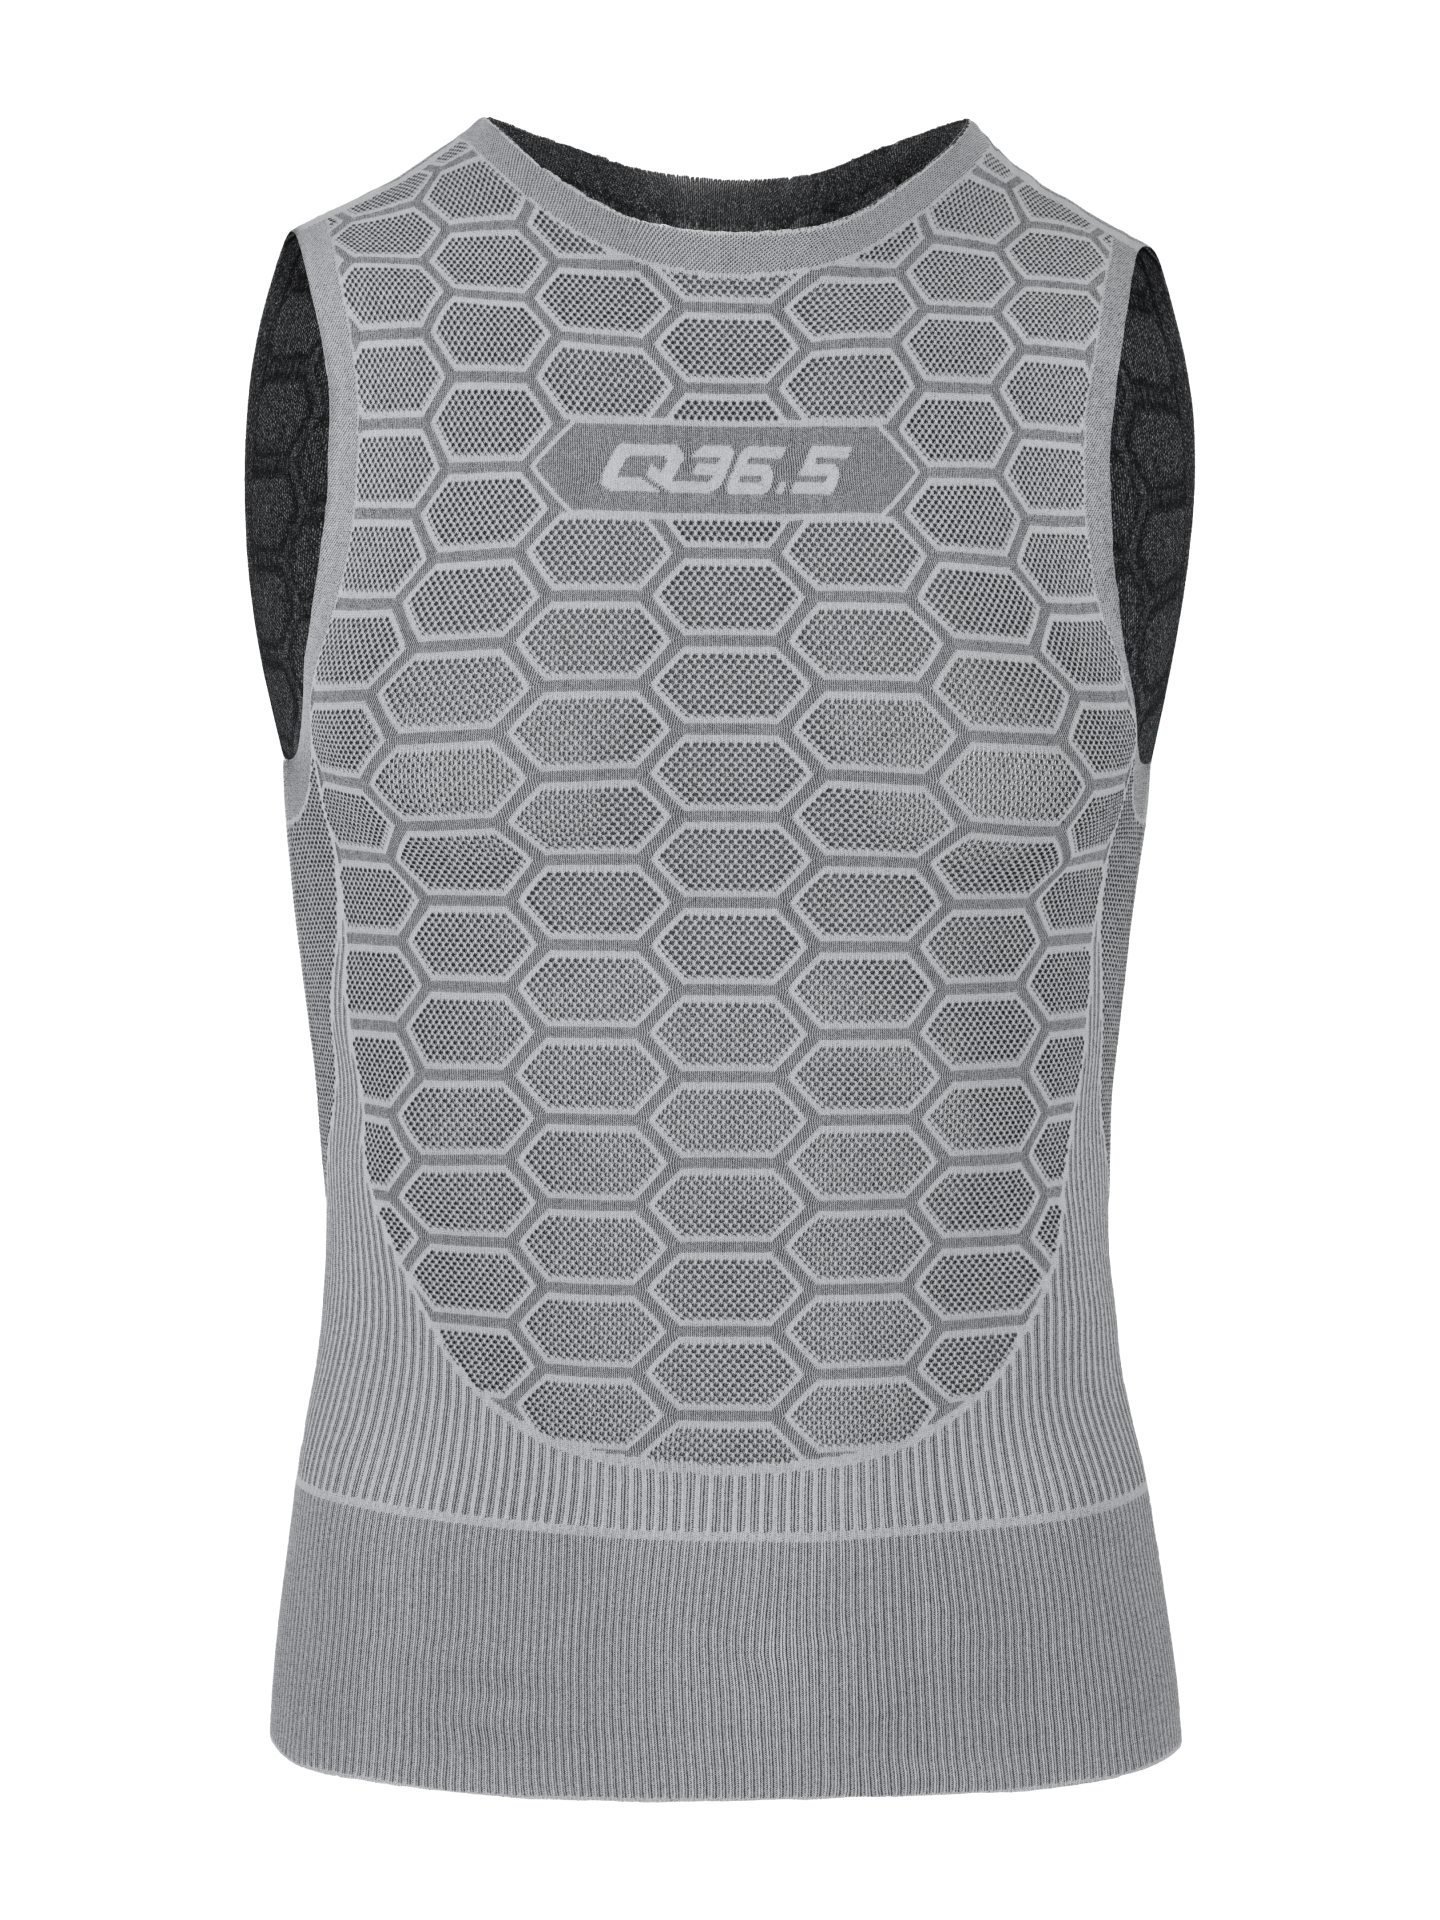 dhb Lightweight Mesh Sleeveless Base Layer review – a pleasing all-rounder